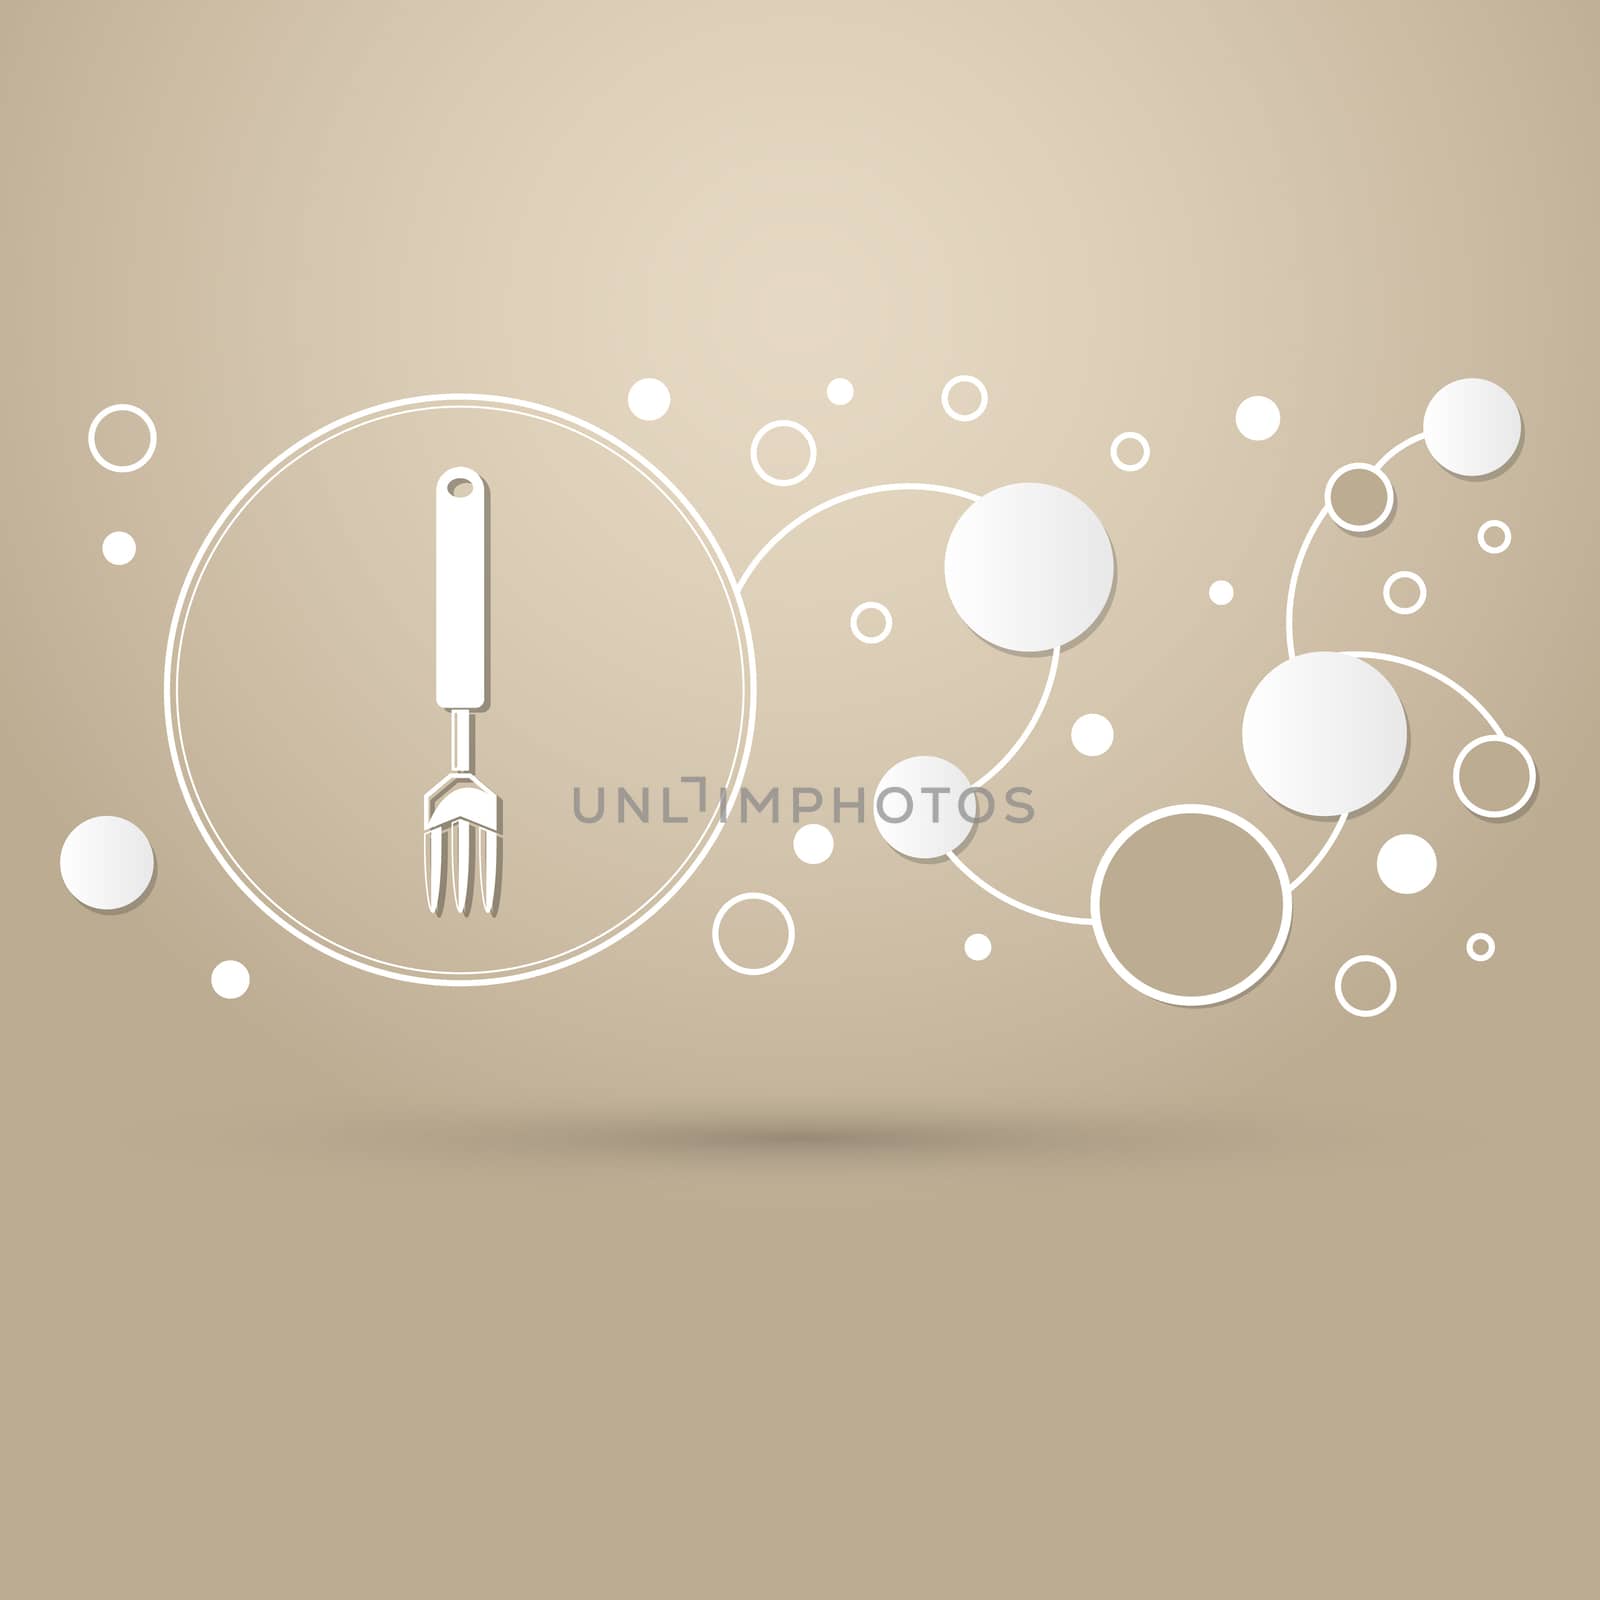 fork icon on a brown background with elegant style and modern design infographic. illustration